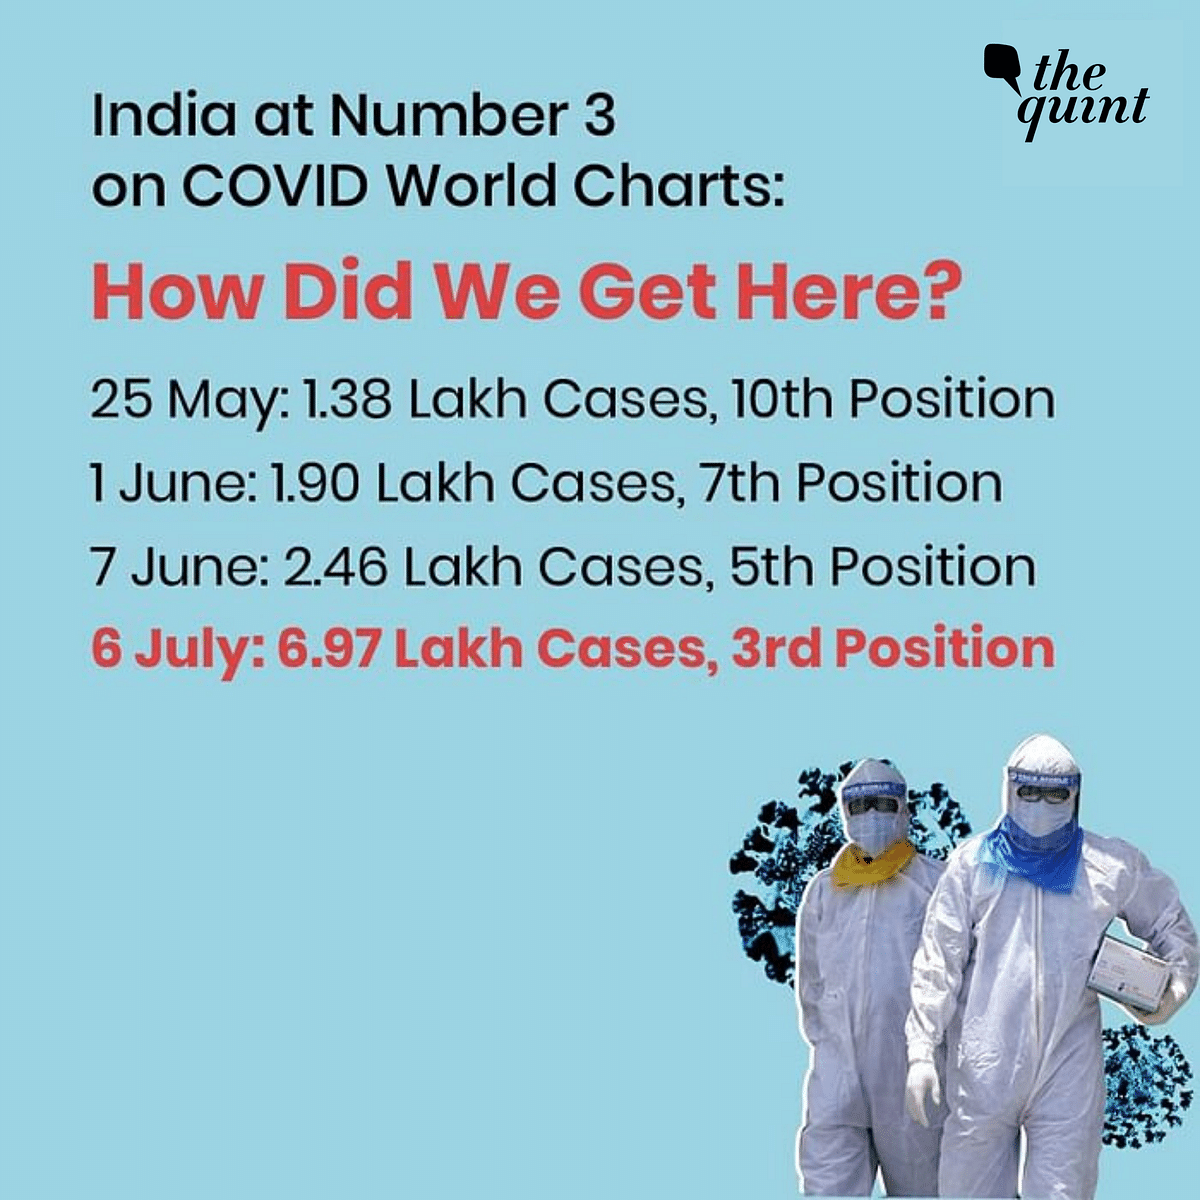 India Ranks 3rd Globally in COVID-19 Cases: How Did We Get Here?